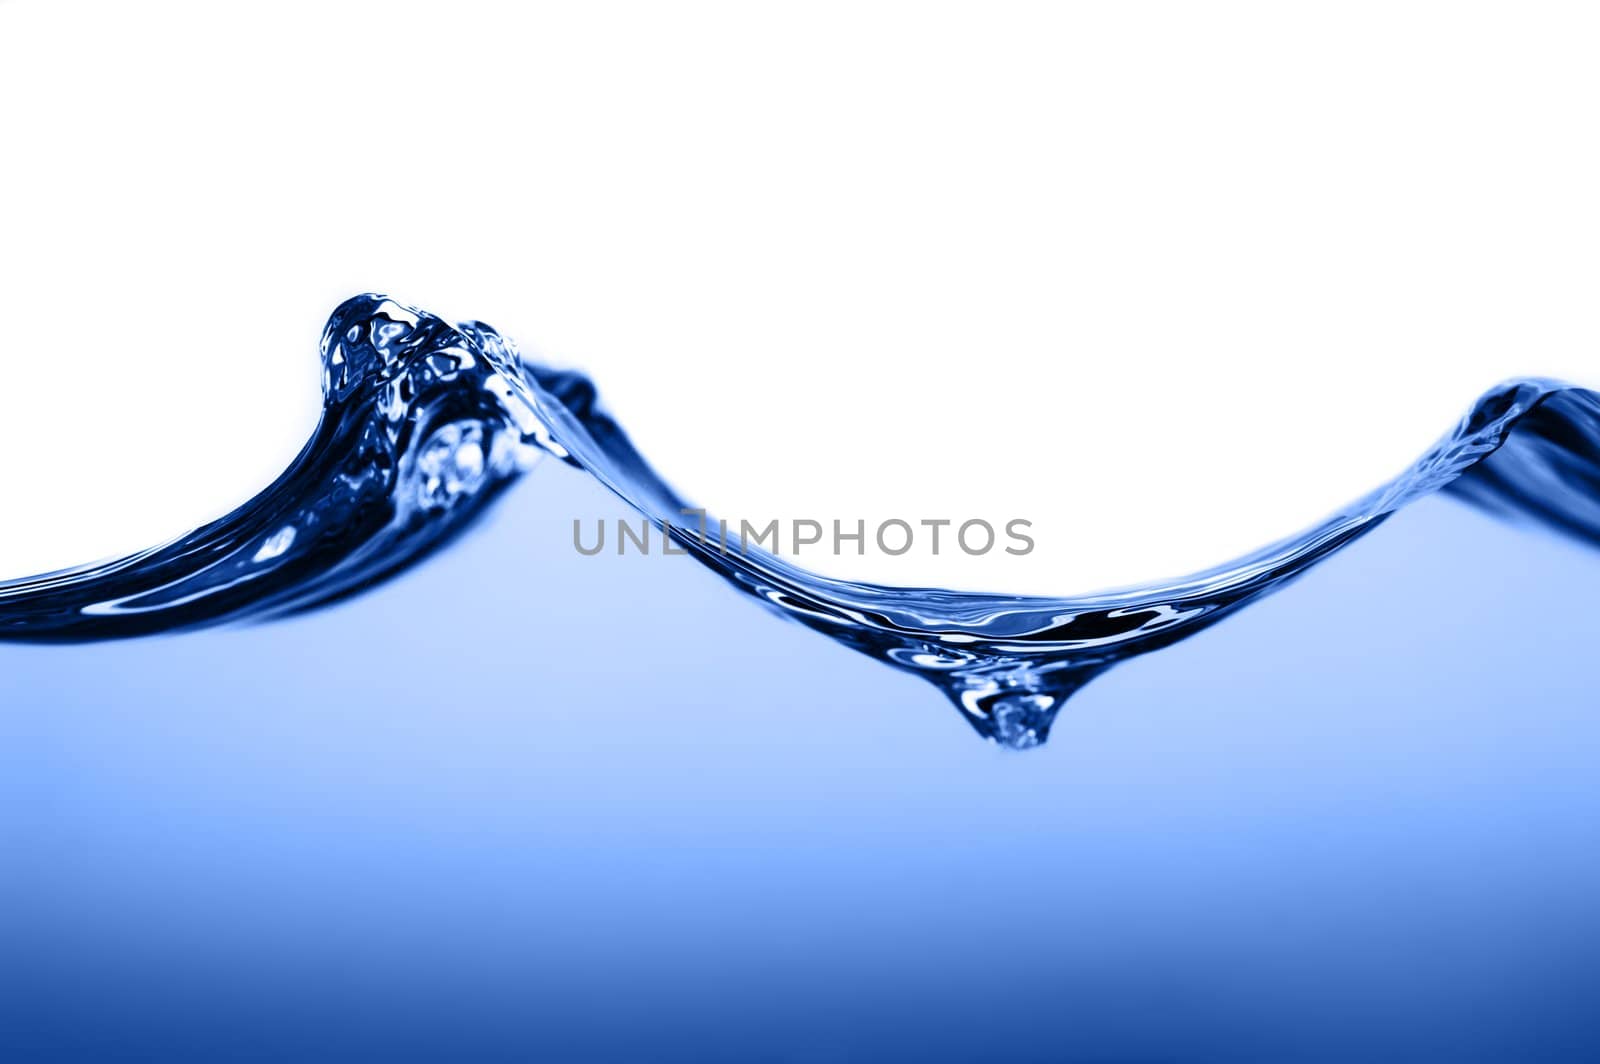 Crisp clear water photographed high speed.